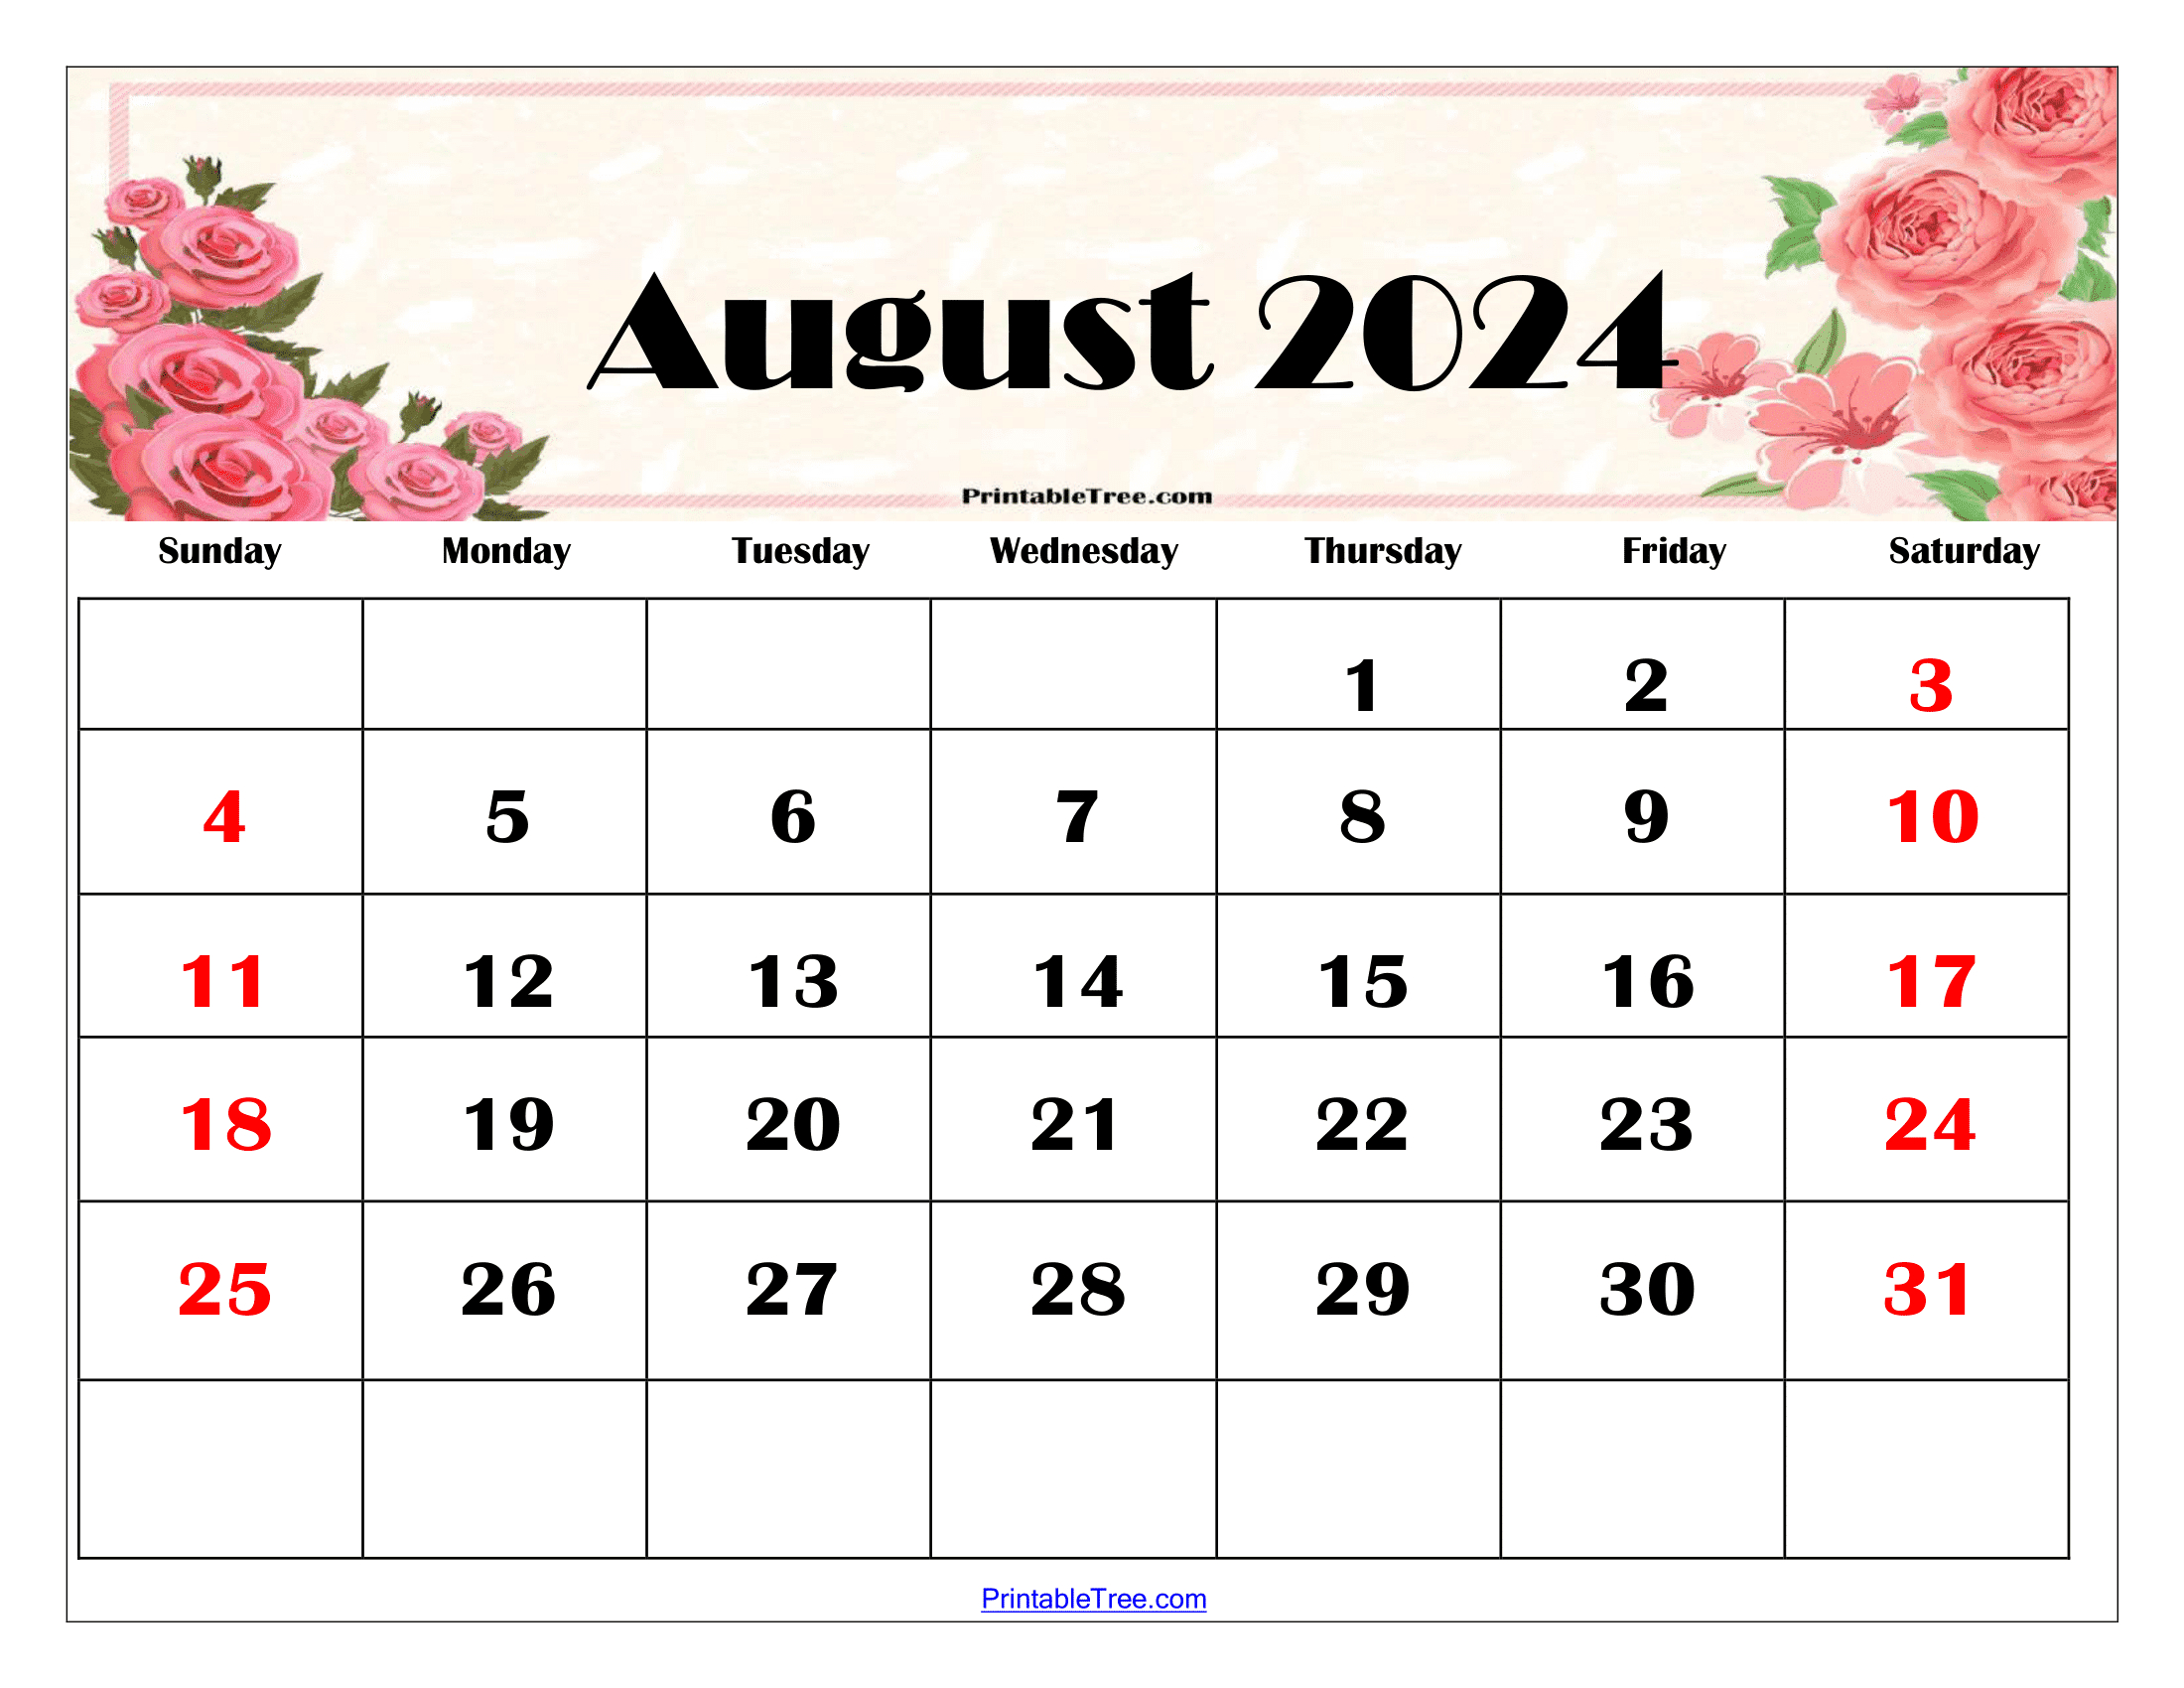 August 2024 Calendar Printable Pdf Templates Free Download within Free Printable August 2024 Floral Calendar With Holidays